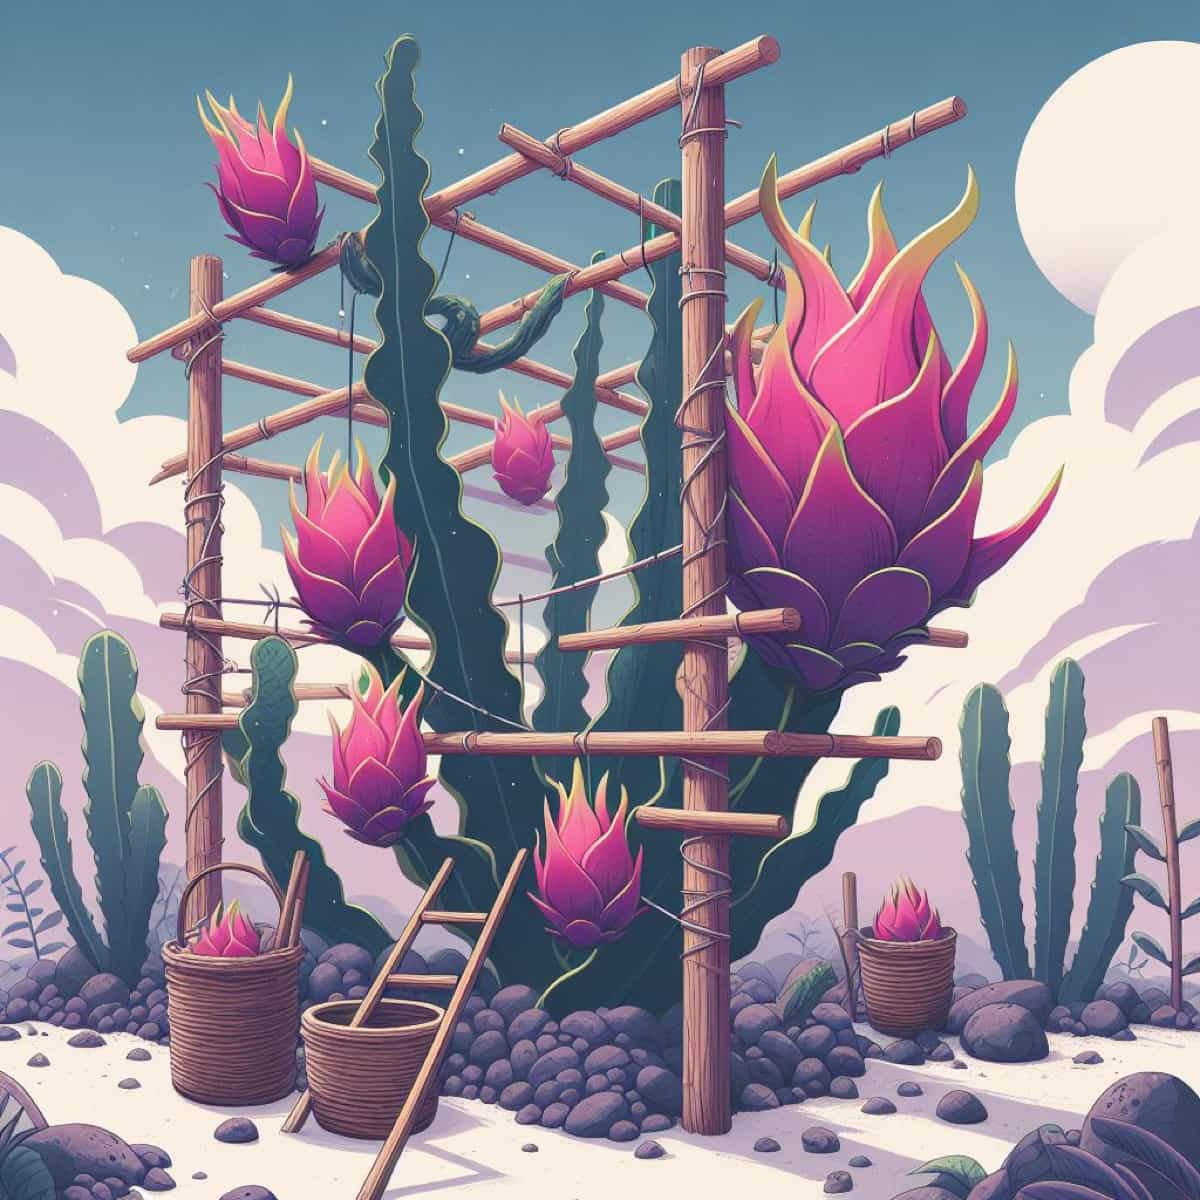 How to Build a Trellis for Dragon Fruit